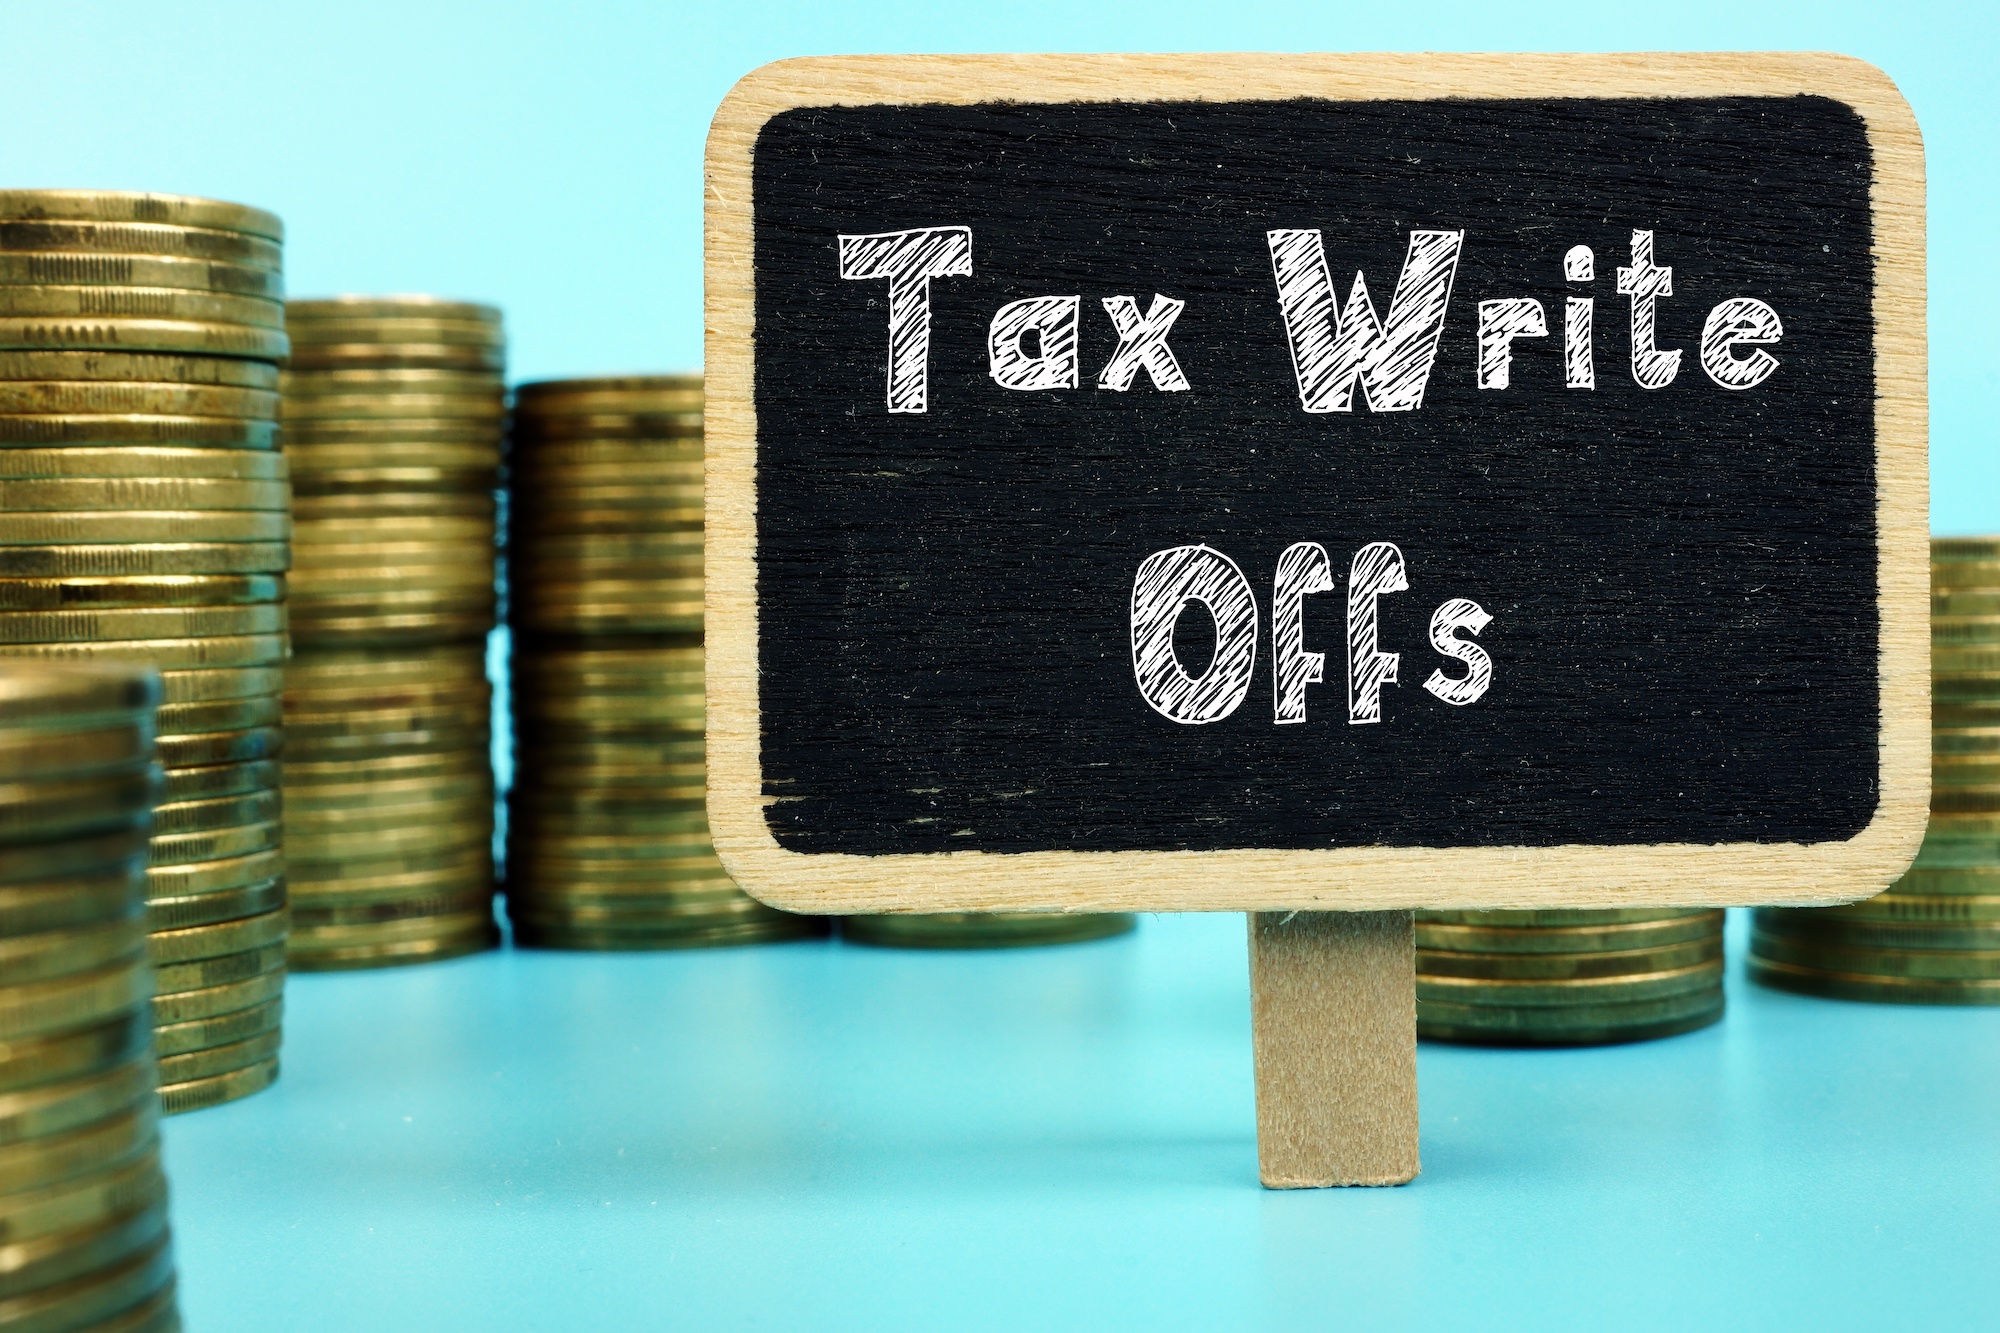 Conceptual photo about Tax Write-Off with handwritten phrase.